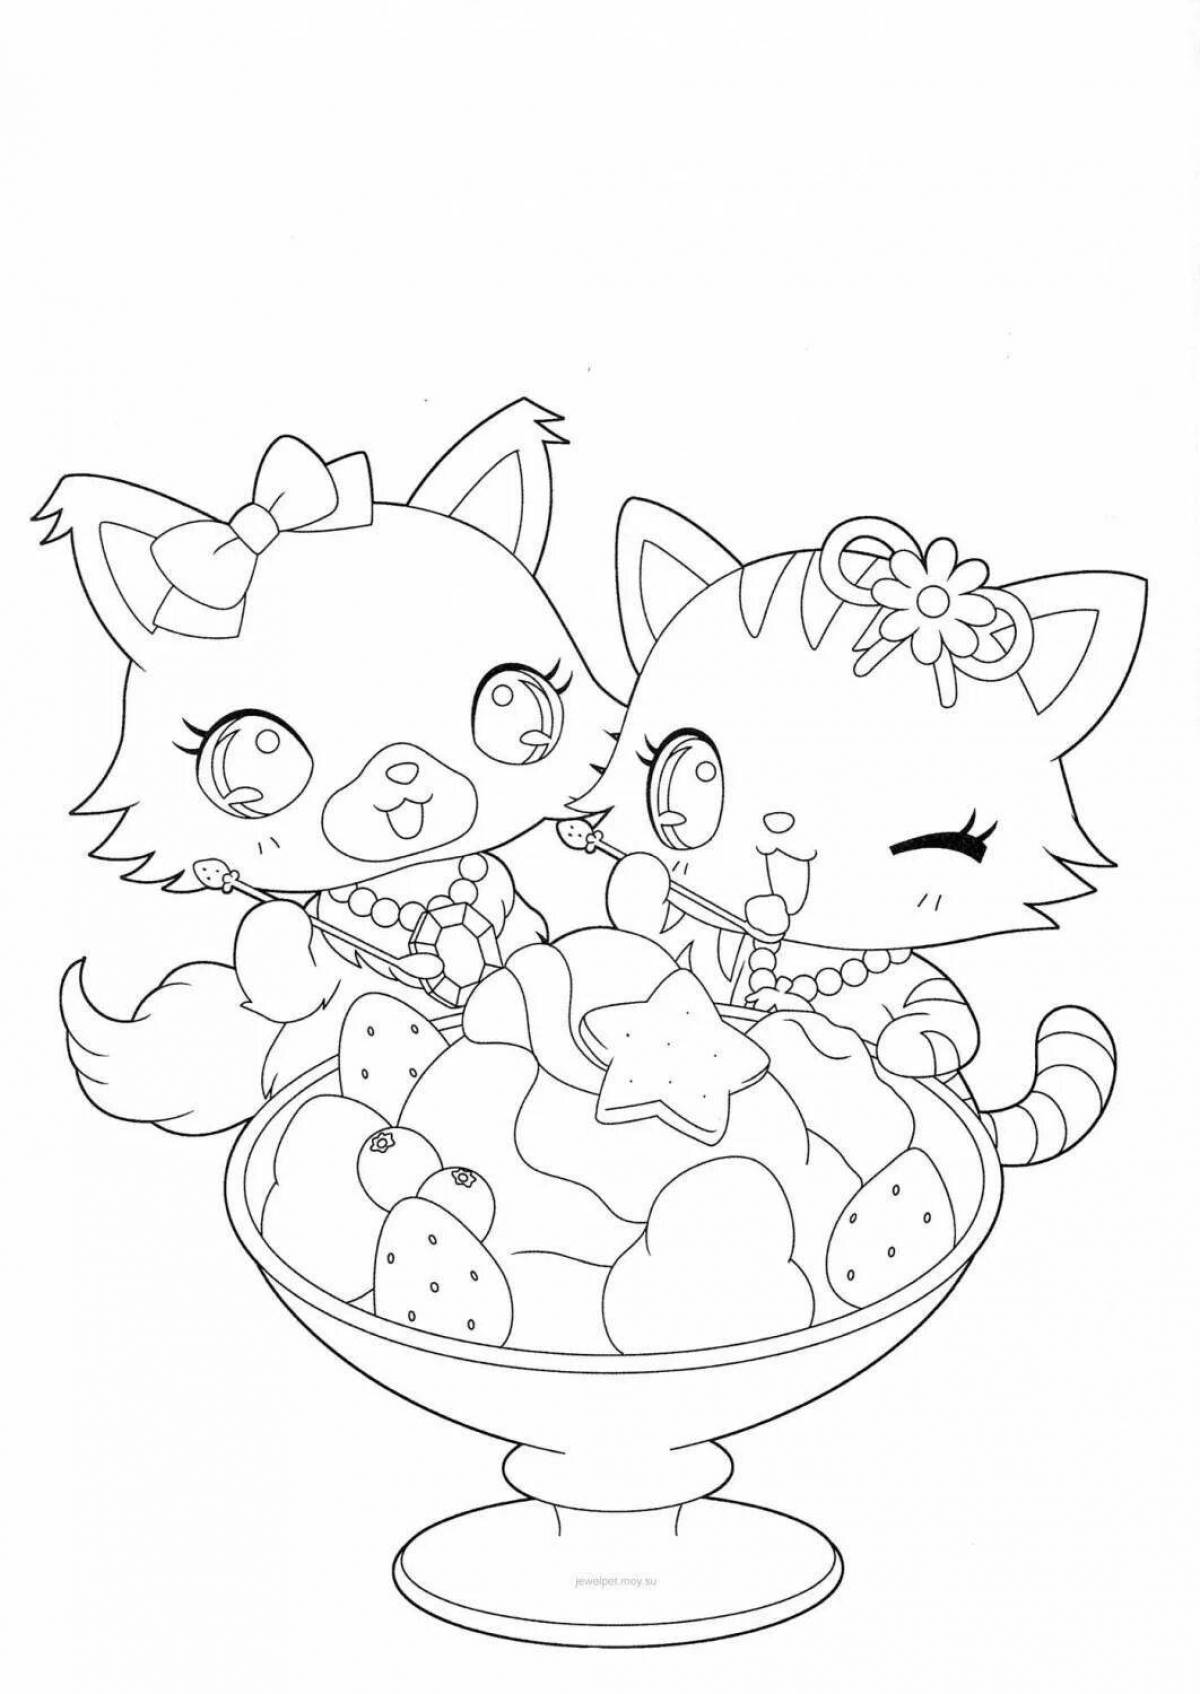 Inquisitive anime kittens coloring page